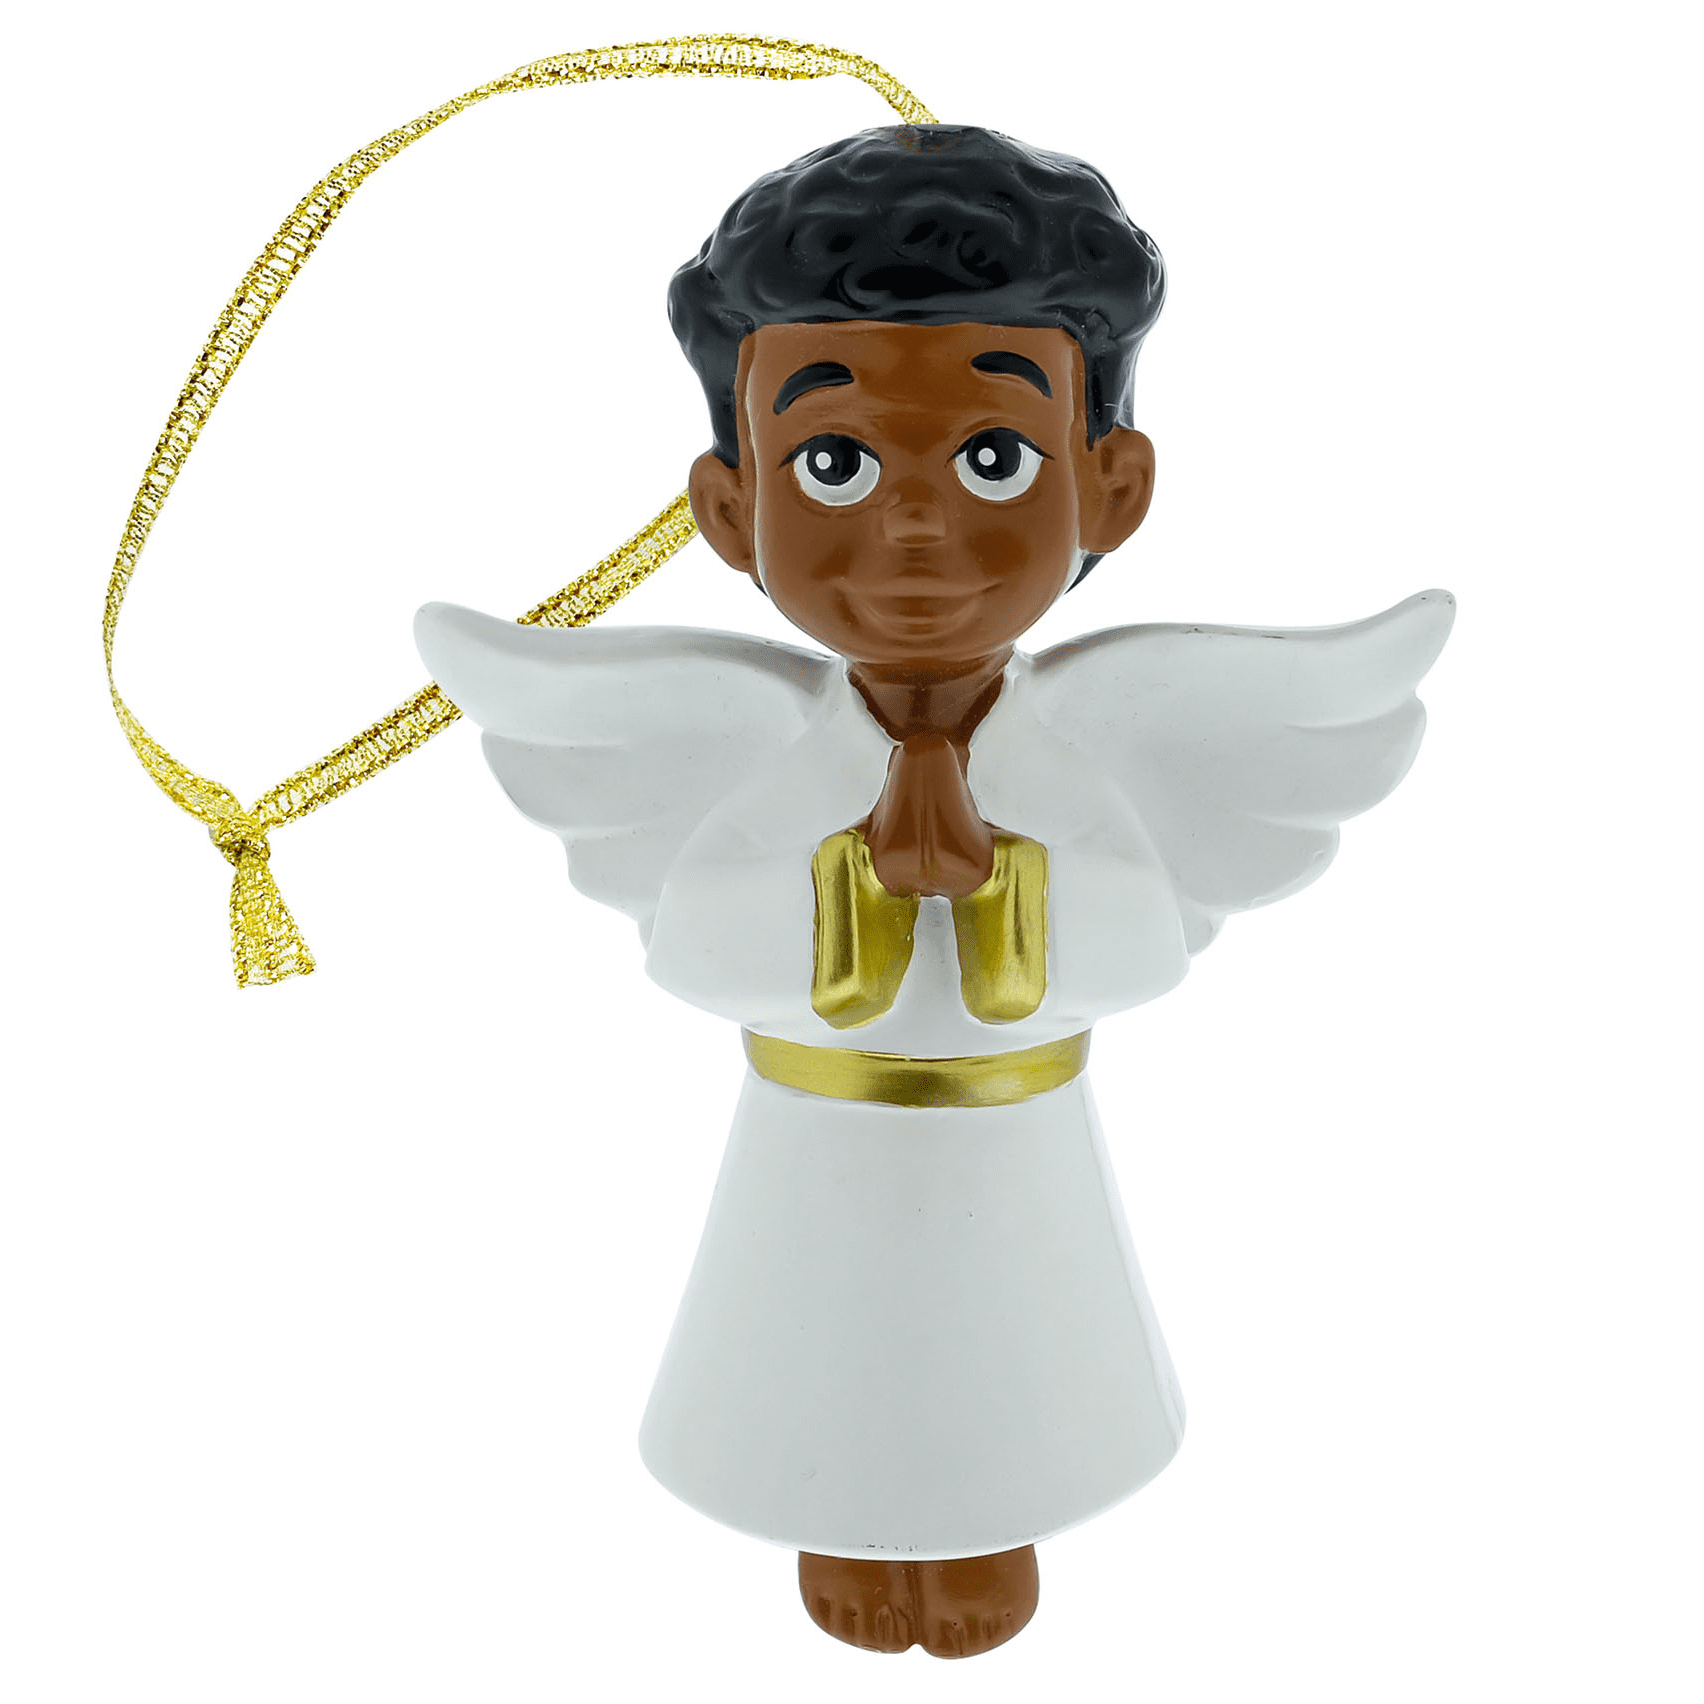 Black Paper Party, Boy Angel Christmas Ornament, 3.5 inches Tall, Resin, Multi-Color, White, Gold